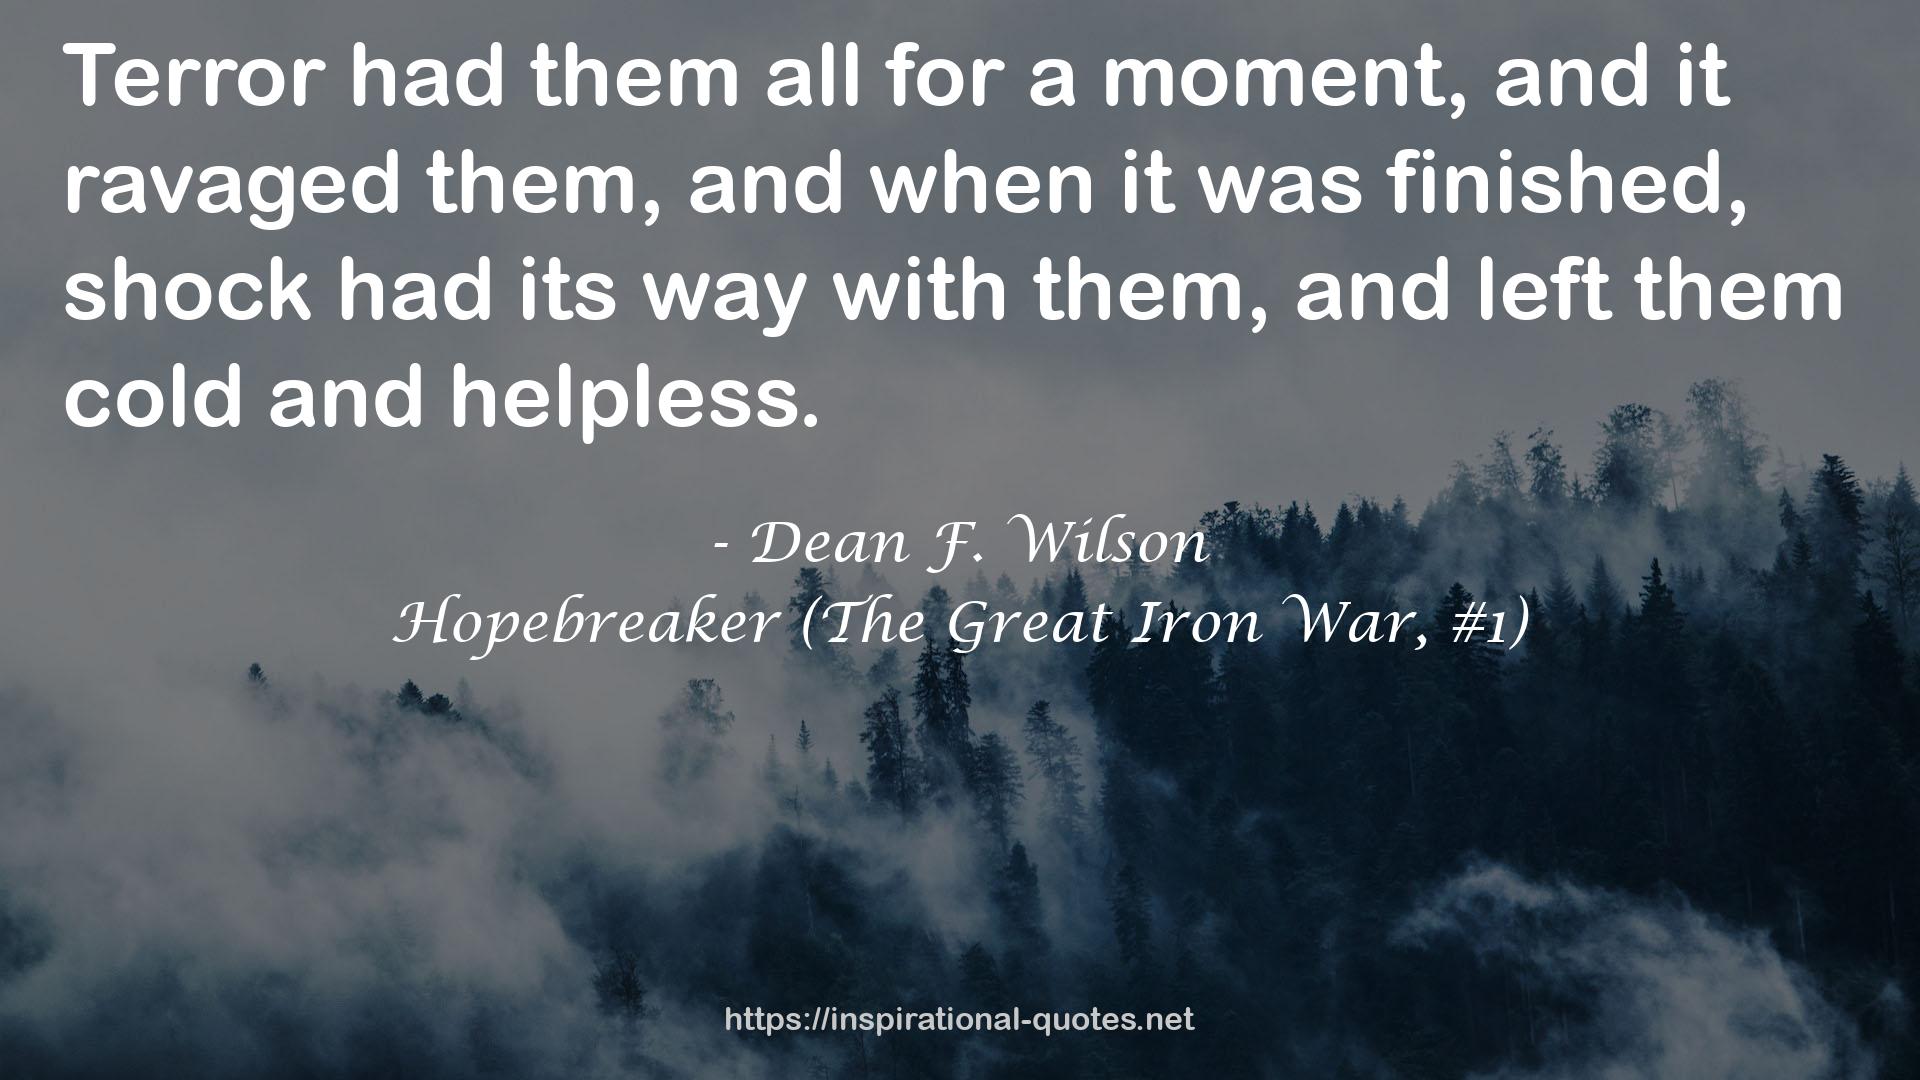 Hopebreaker (The Great Iron War, #1) QUOTES